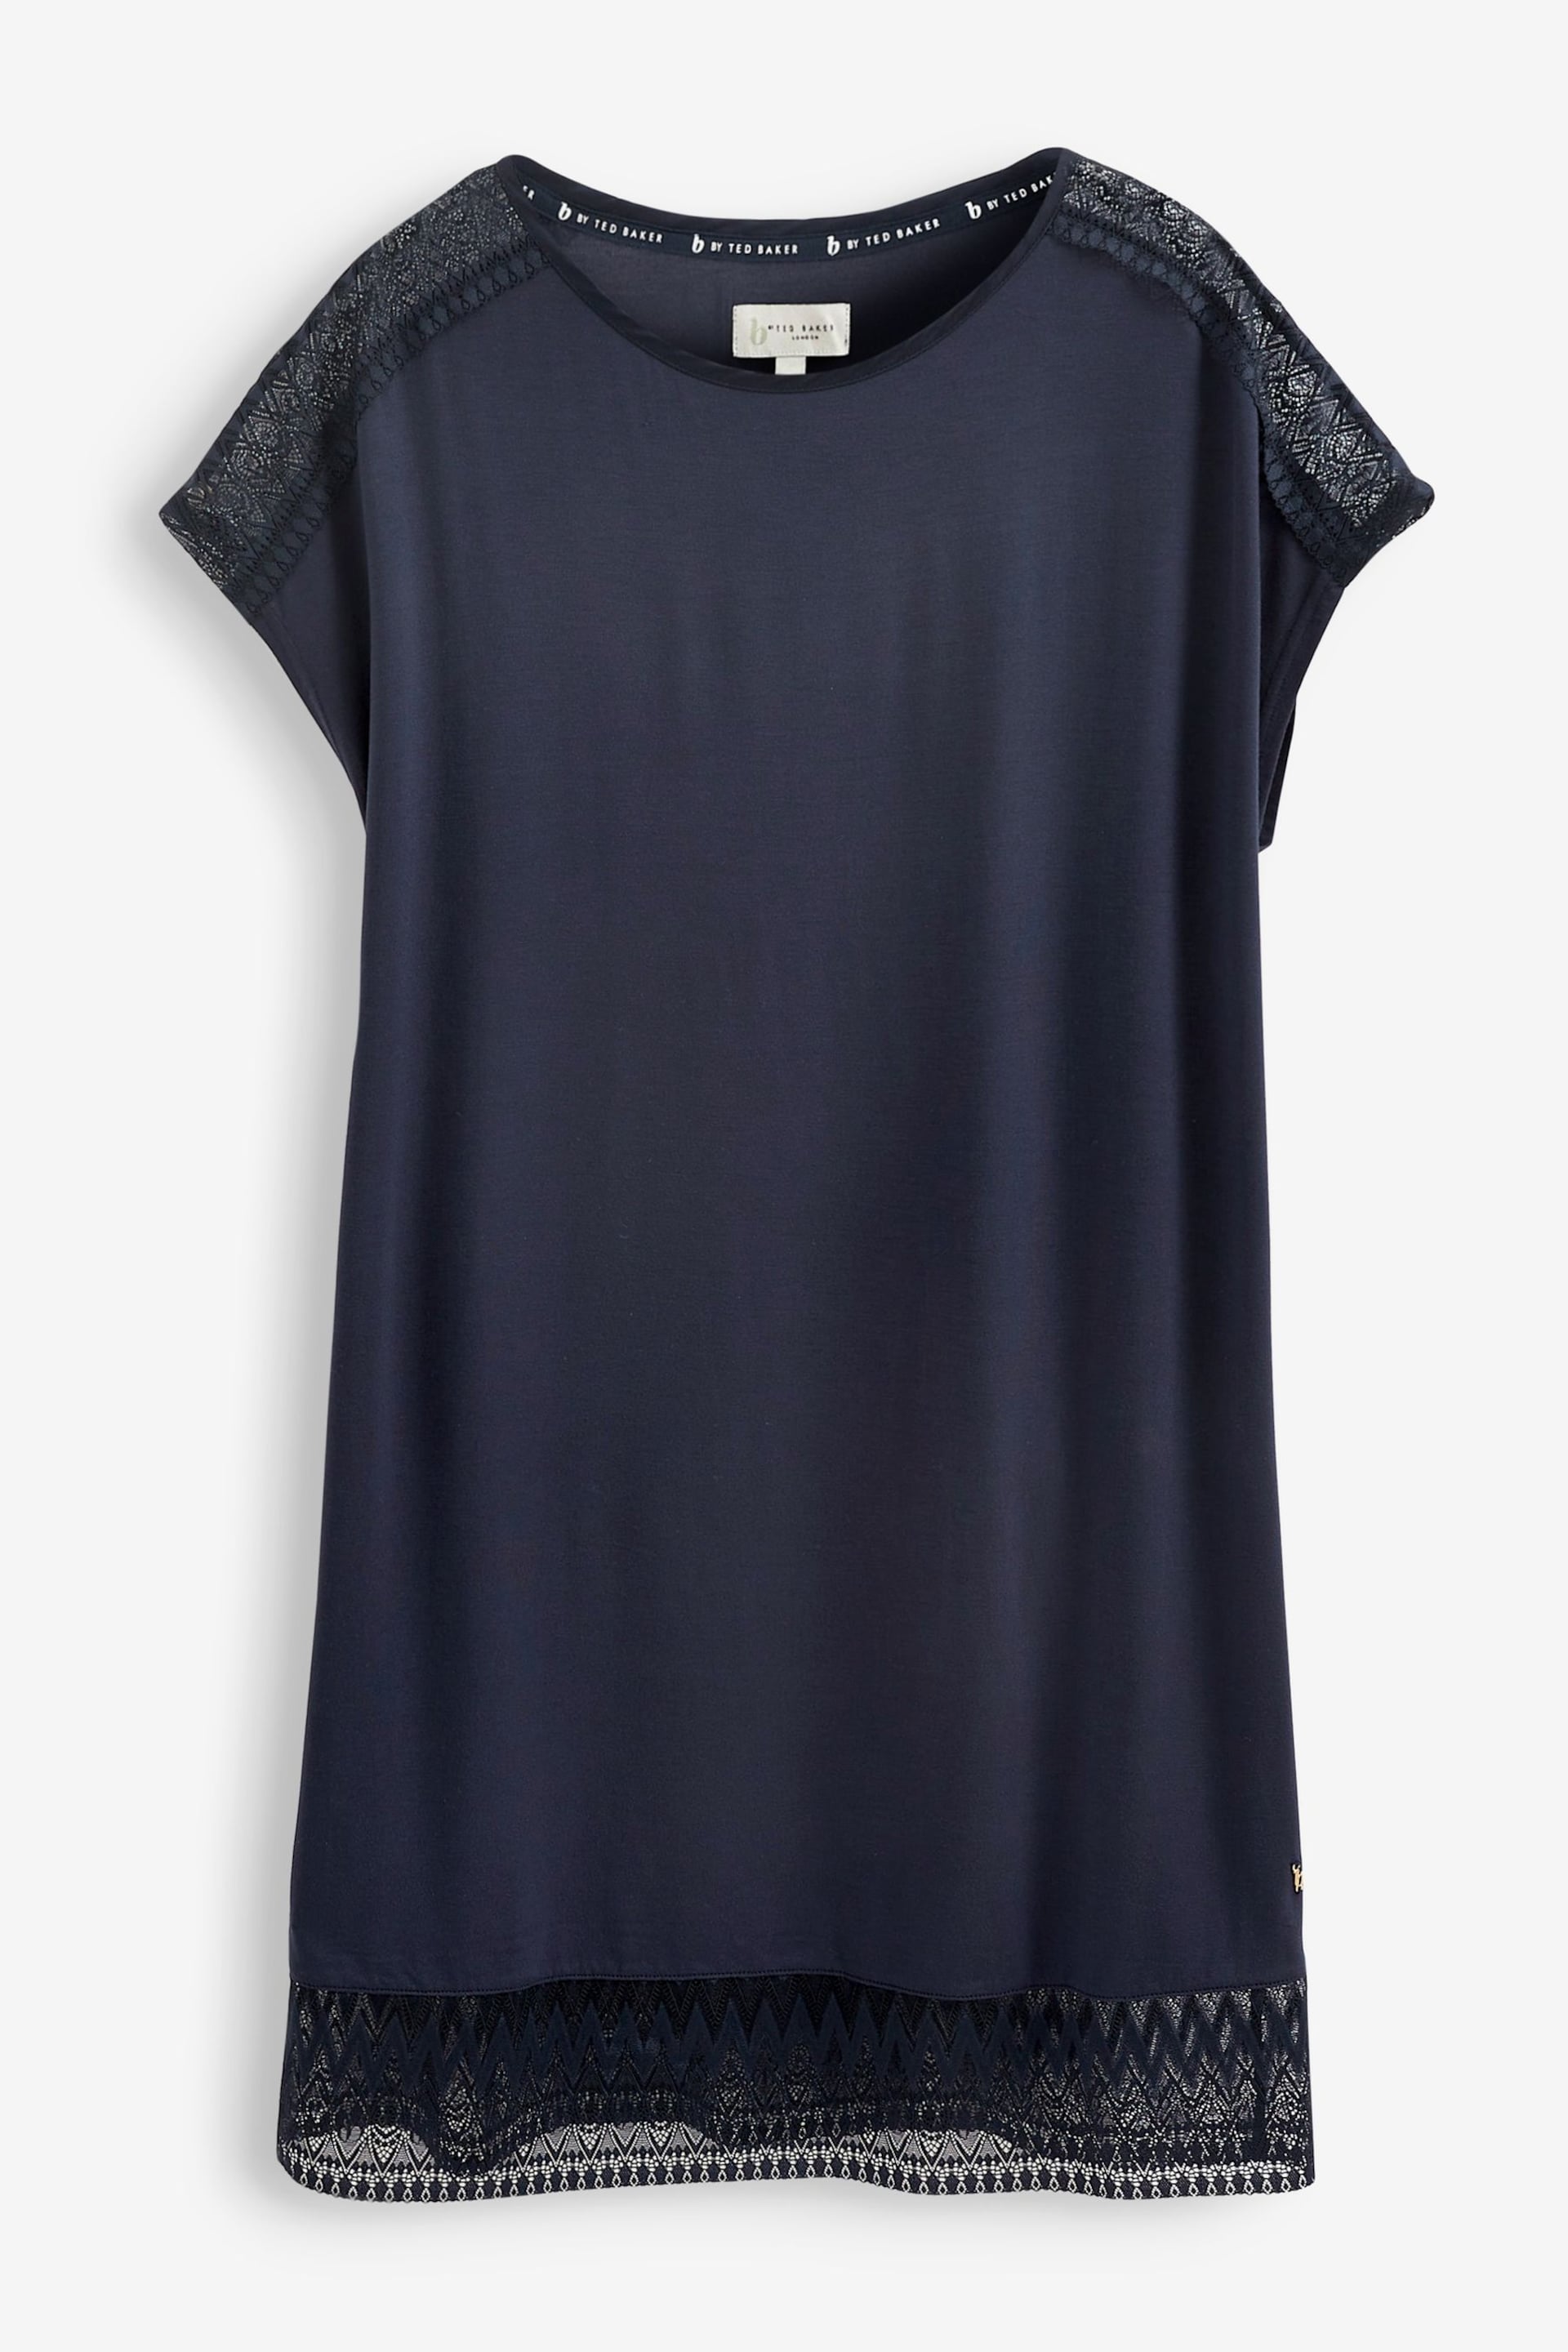 B by Ted Baker Modal Nightie - Image 6 of 6